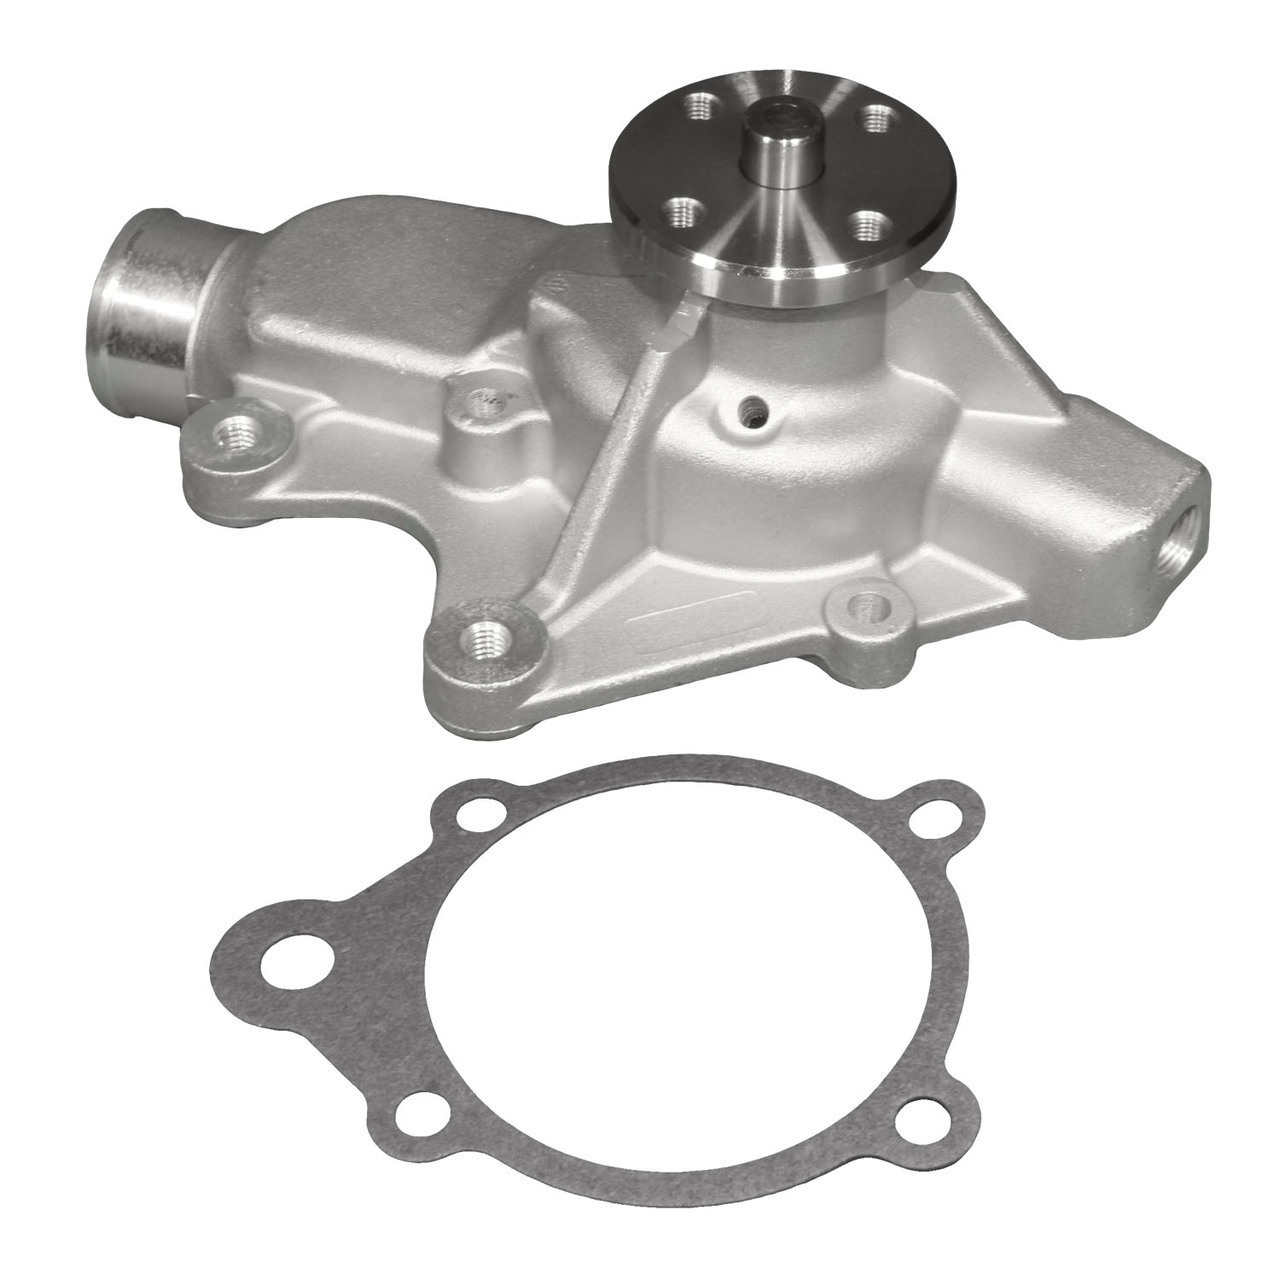 1999 Jeep Wrangler Engine Water Pump - ACDelco 252-279